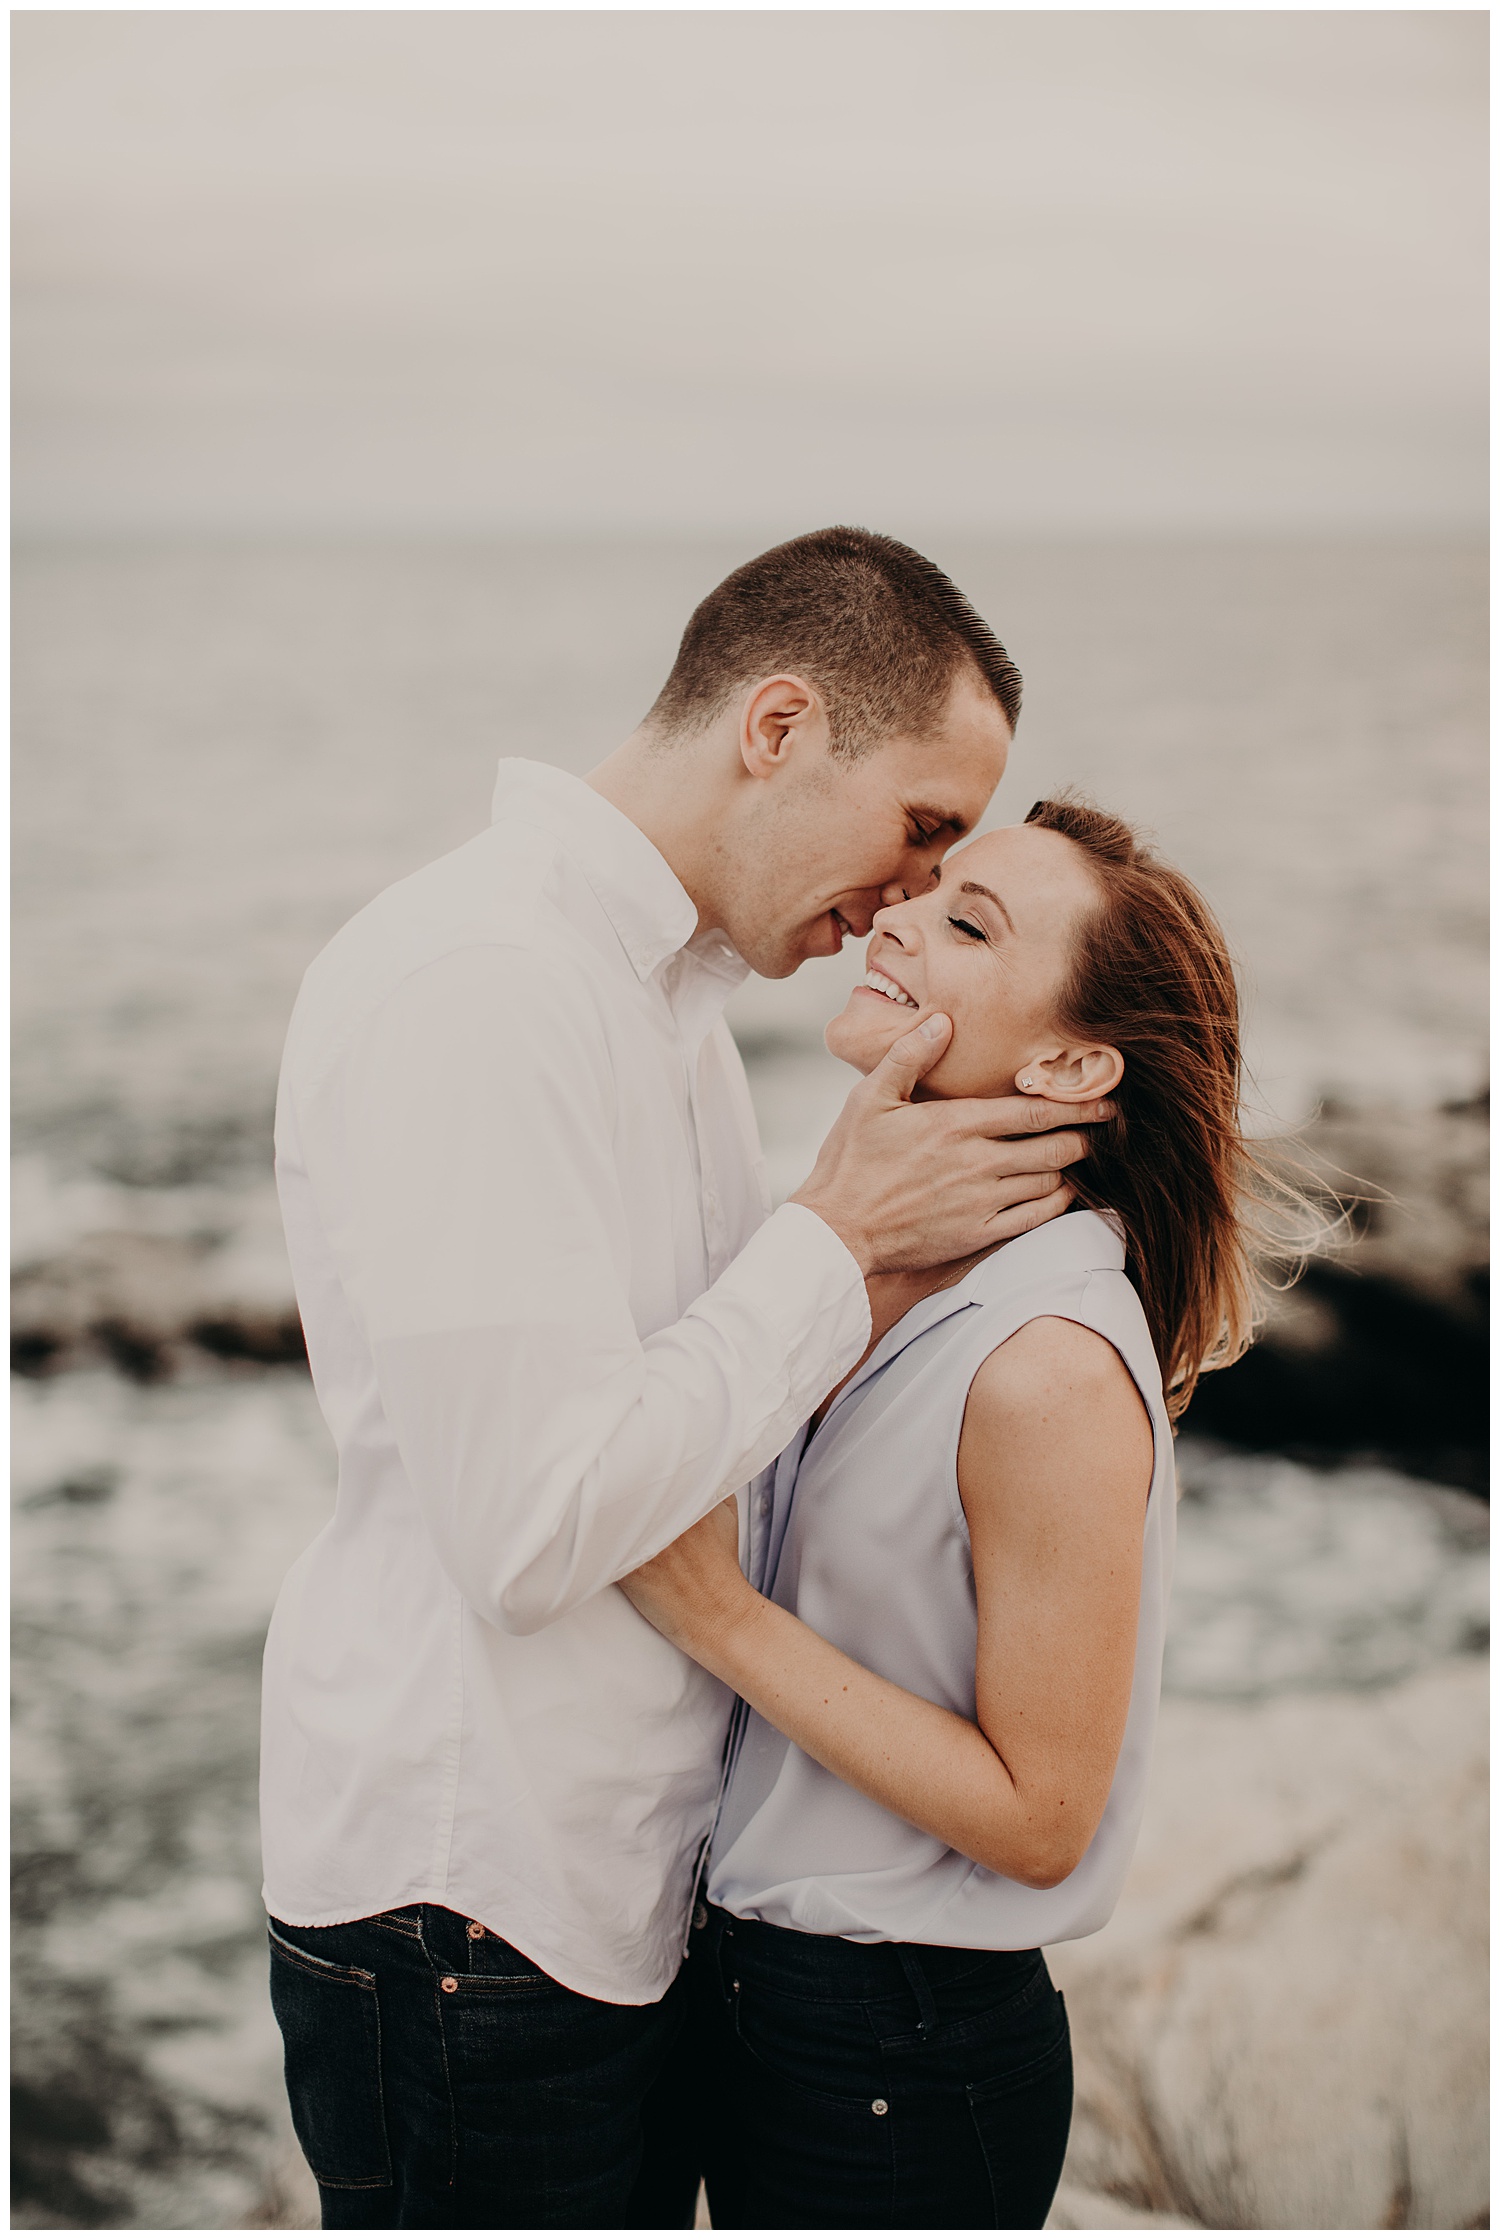 Dan + Sunni's Engagement Session — Move Mountains Co.